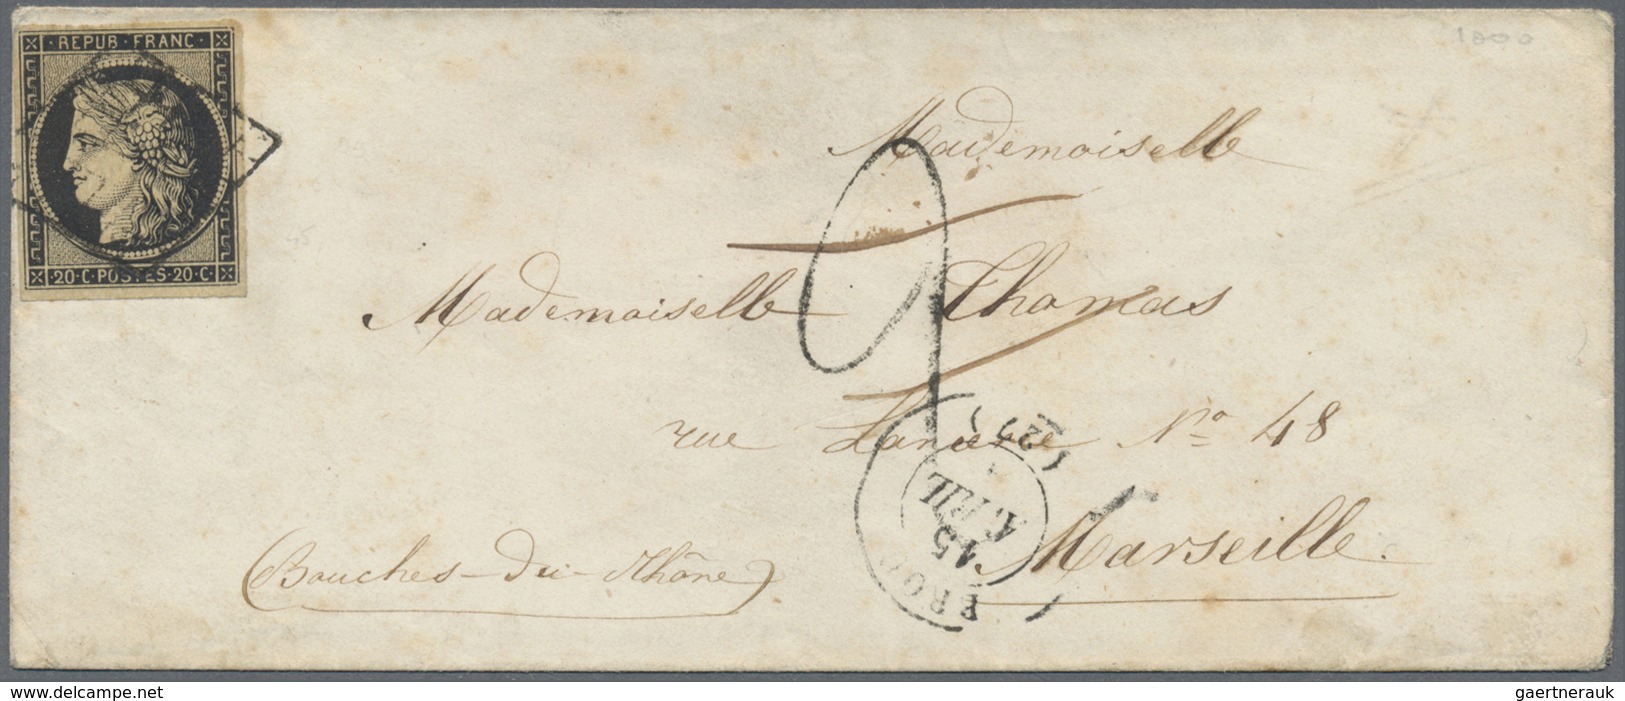 Br Frankreich: 1849/1852, CERES, group of twelve entires bearing frankings 20c. black and 25c. blue, sh